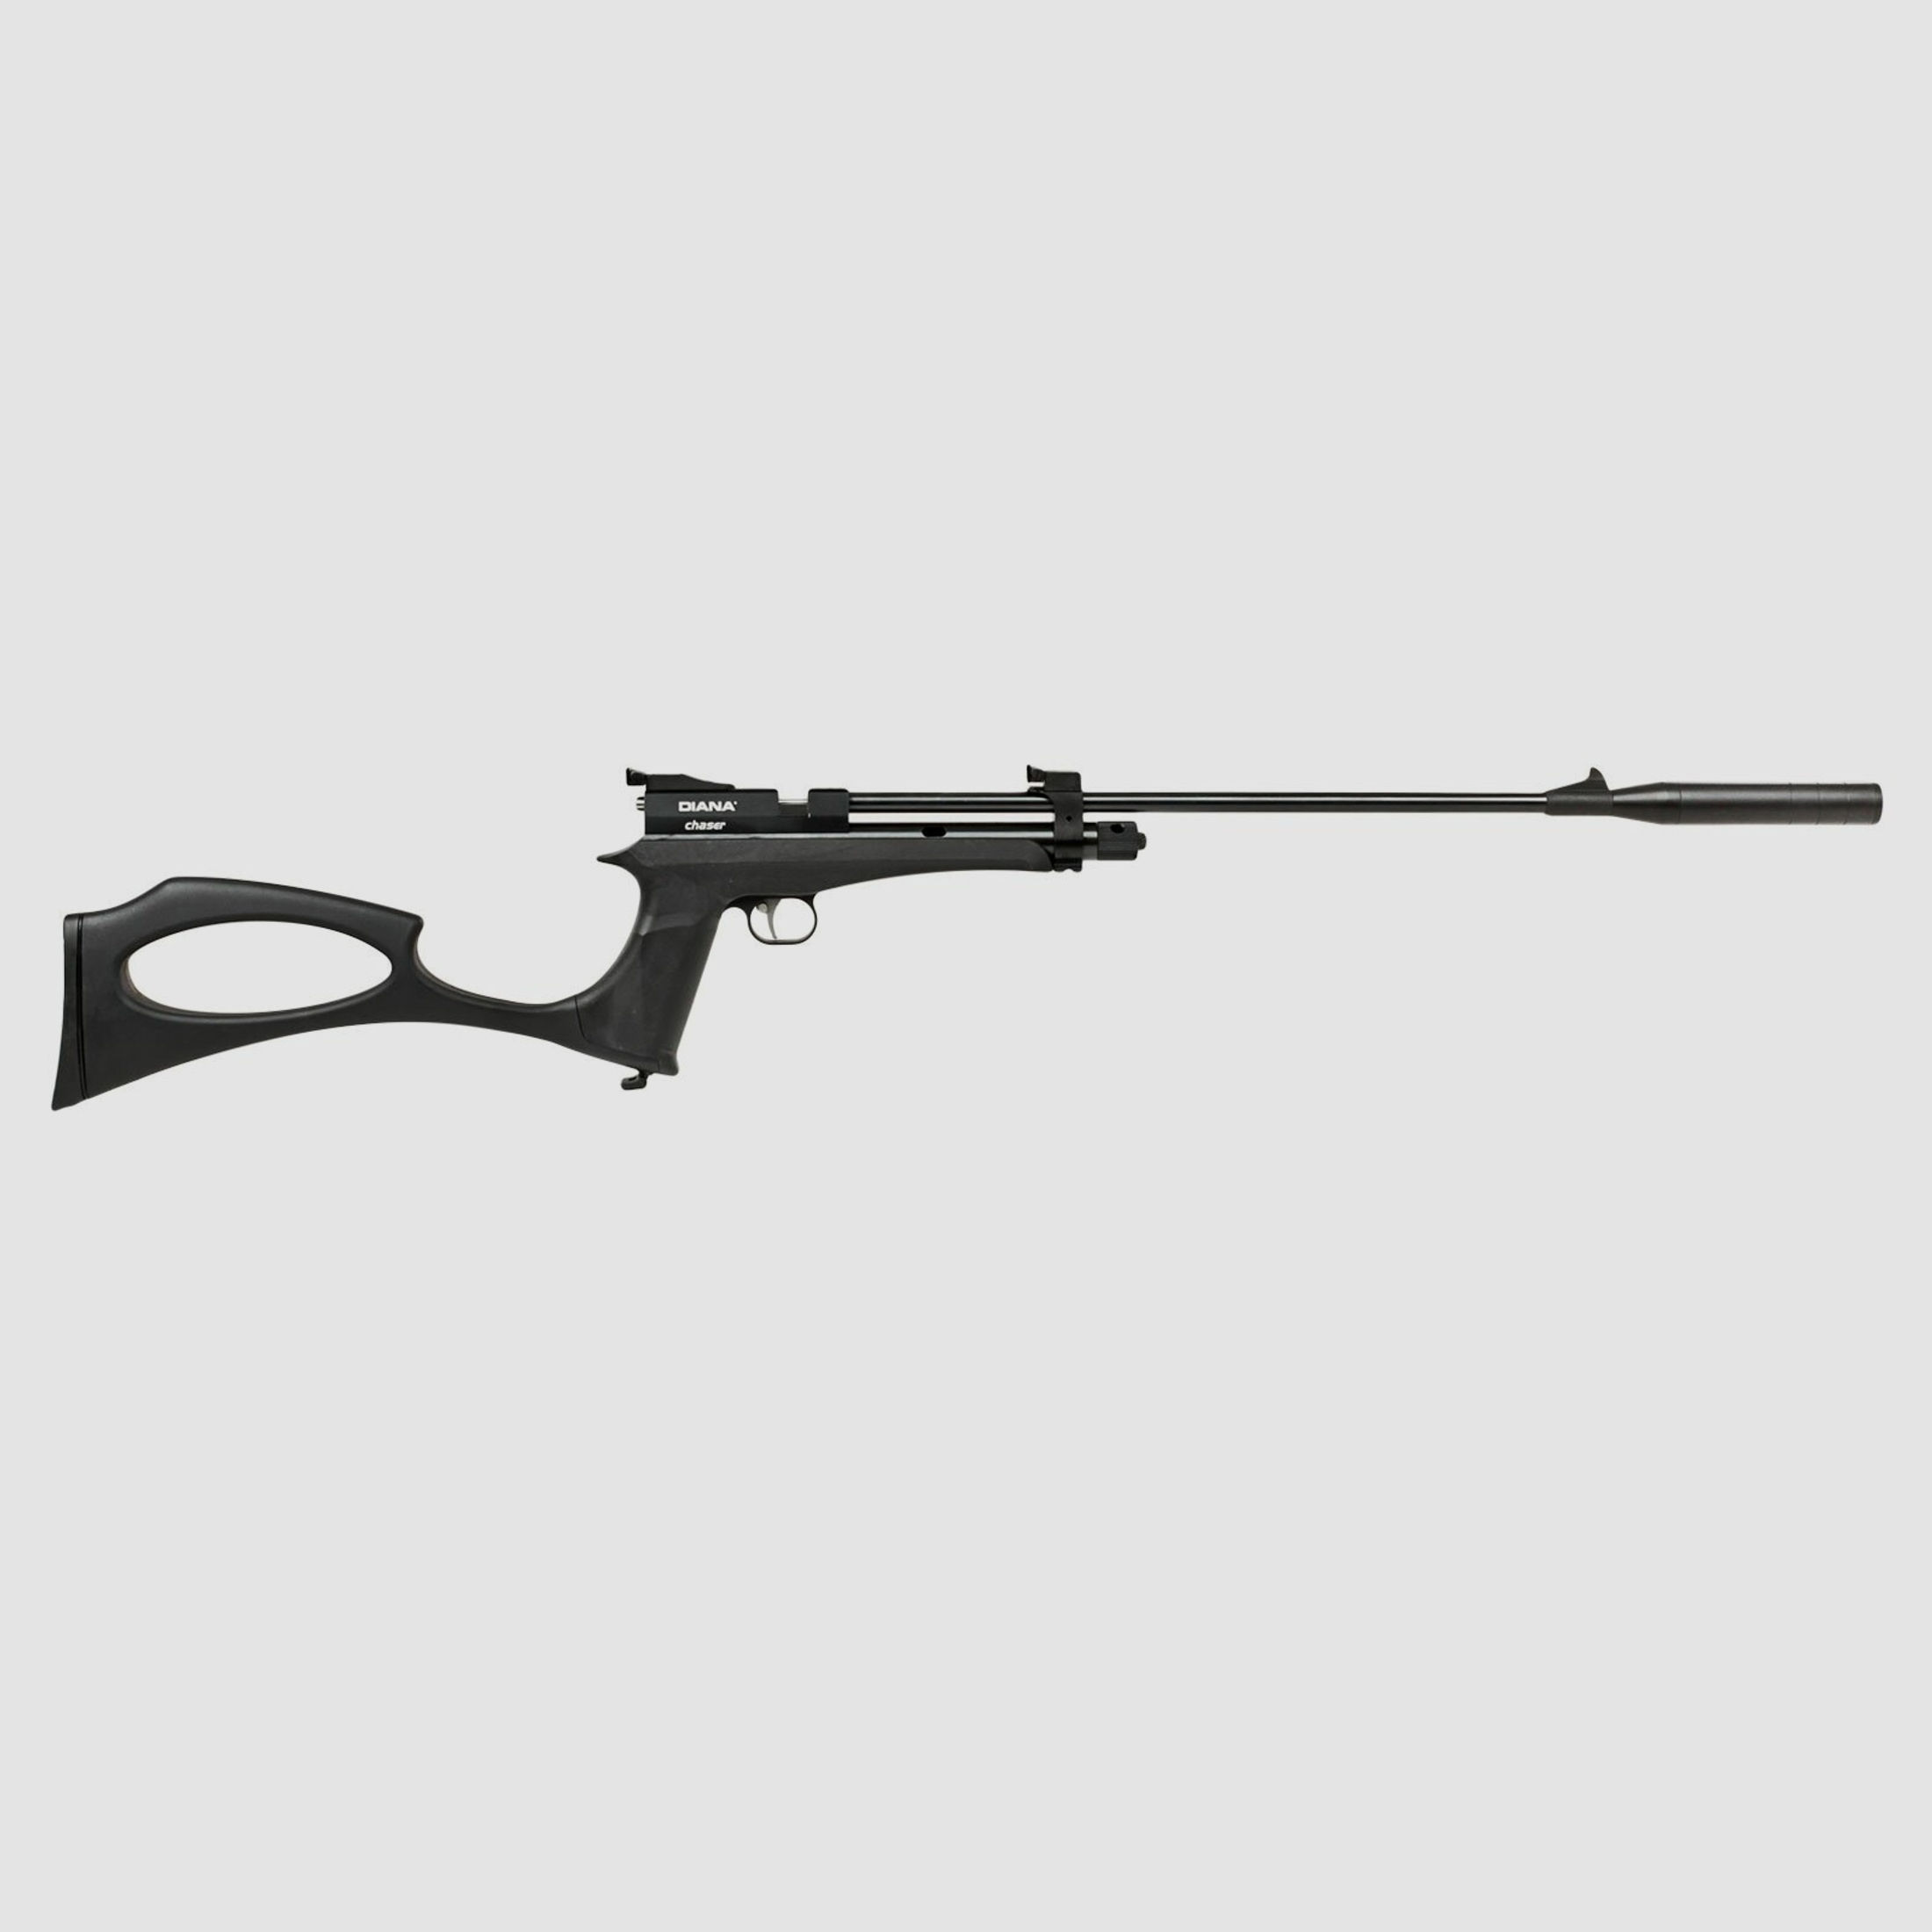 Diana Chaser Rifle Co2 Gewehr 4,5 mm Diabolo (P18)